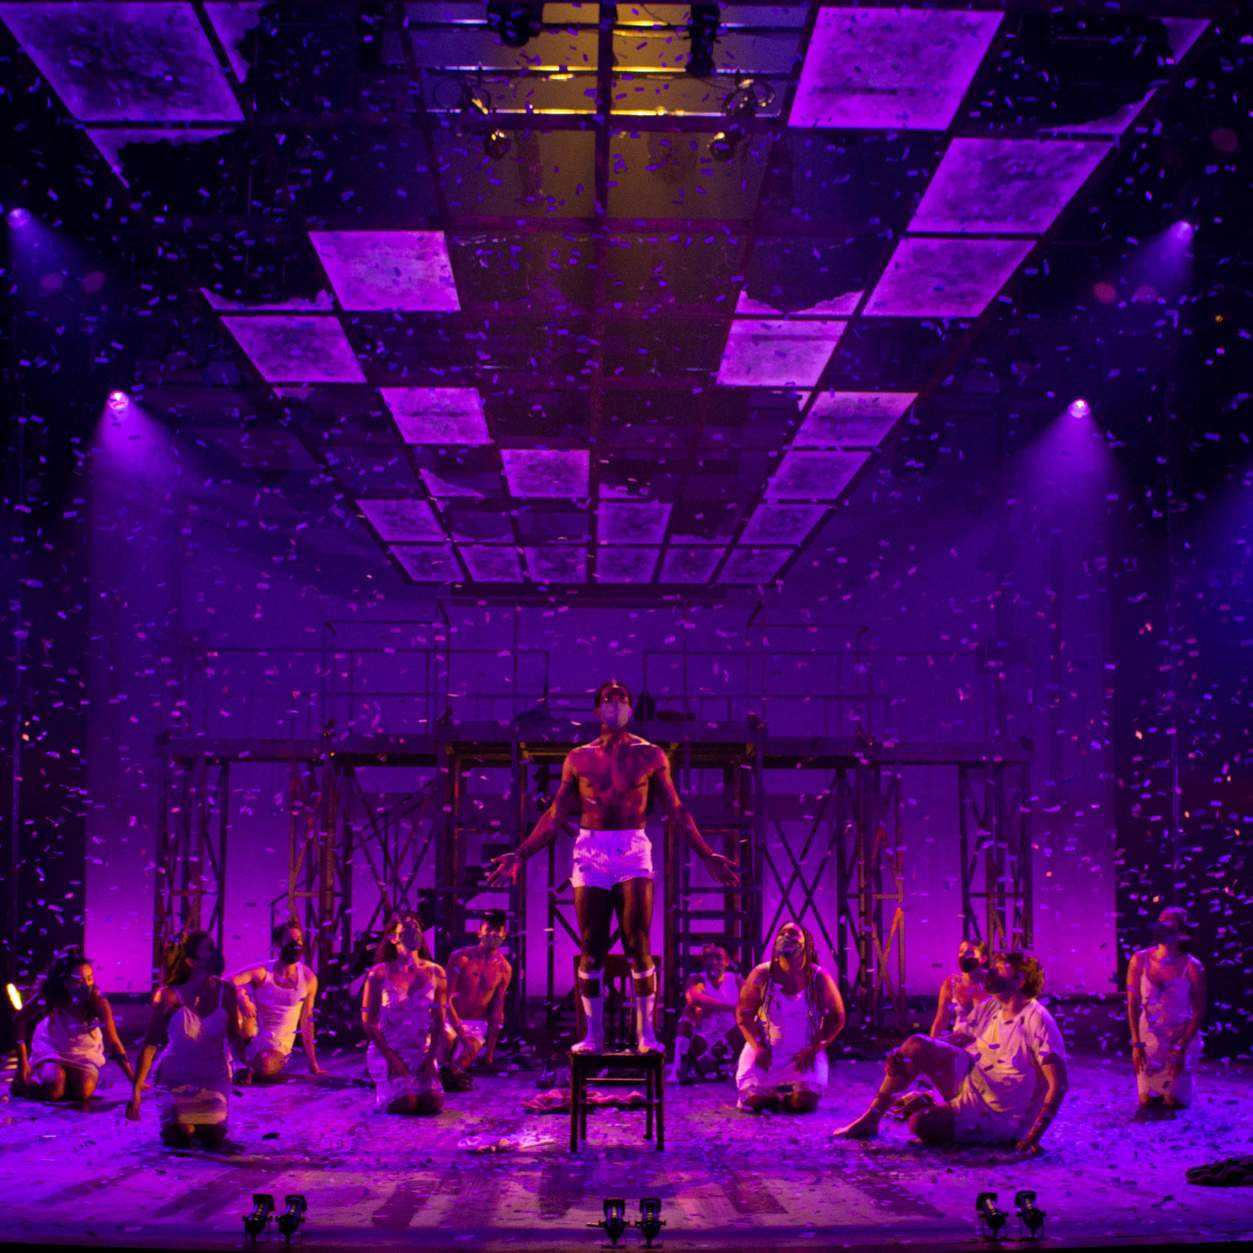 The stage is washed in purple light as purple petals rain down on the cast and fill the entire stage. The whole cast is on stage in their underclothes sitting looking up at the petals in joy and wonder, excluding a young man who is standing on a wooden chair above the rest with his arms spread wide.